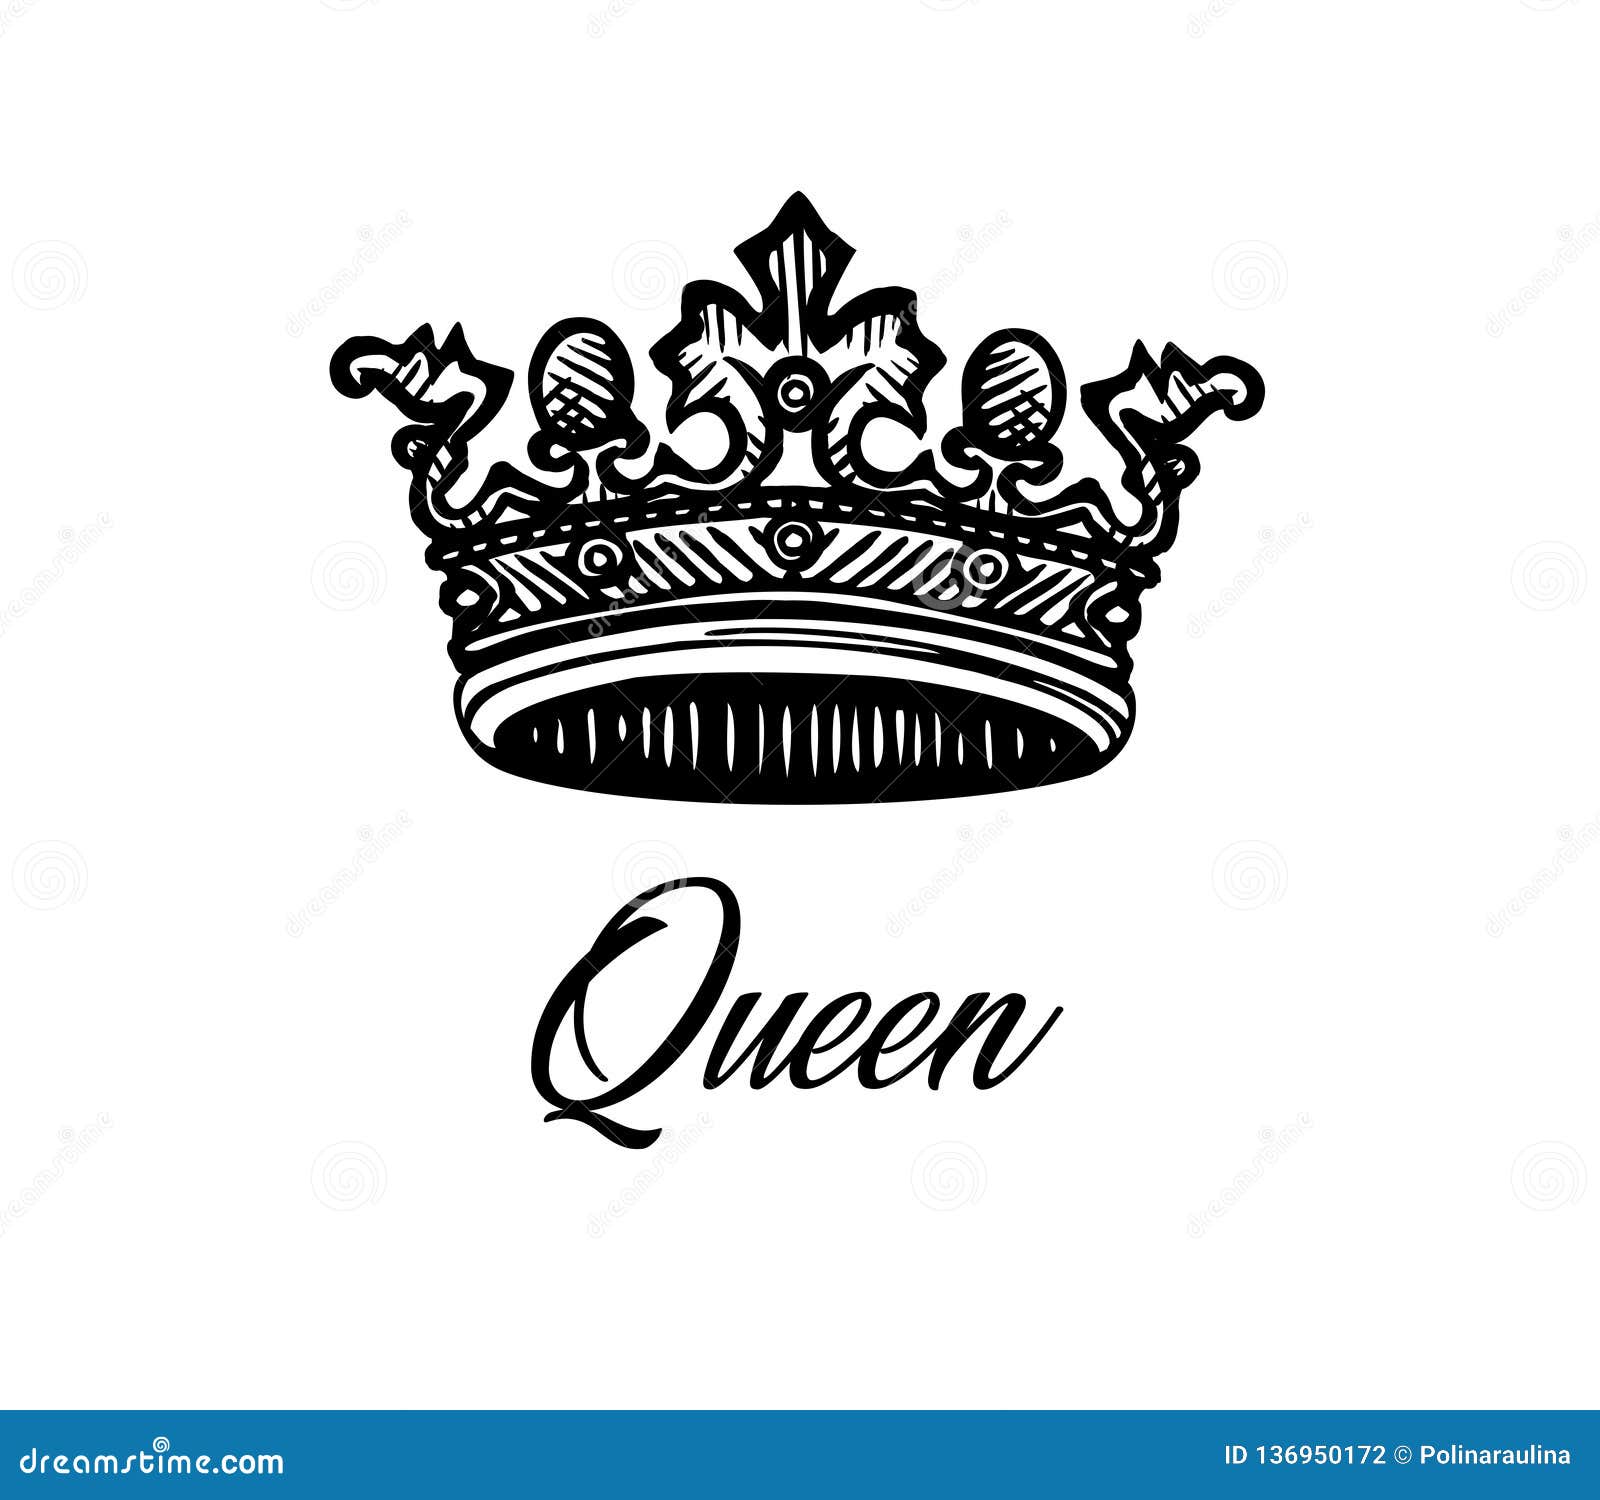 Amazoncom  SanerLian Waterproof Temporary Fake Tattoo Stickers Classic  King Queen Crown Design Set of 2  Beauty  Personal Care